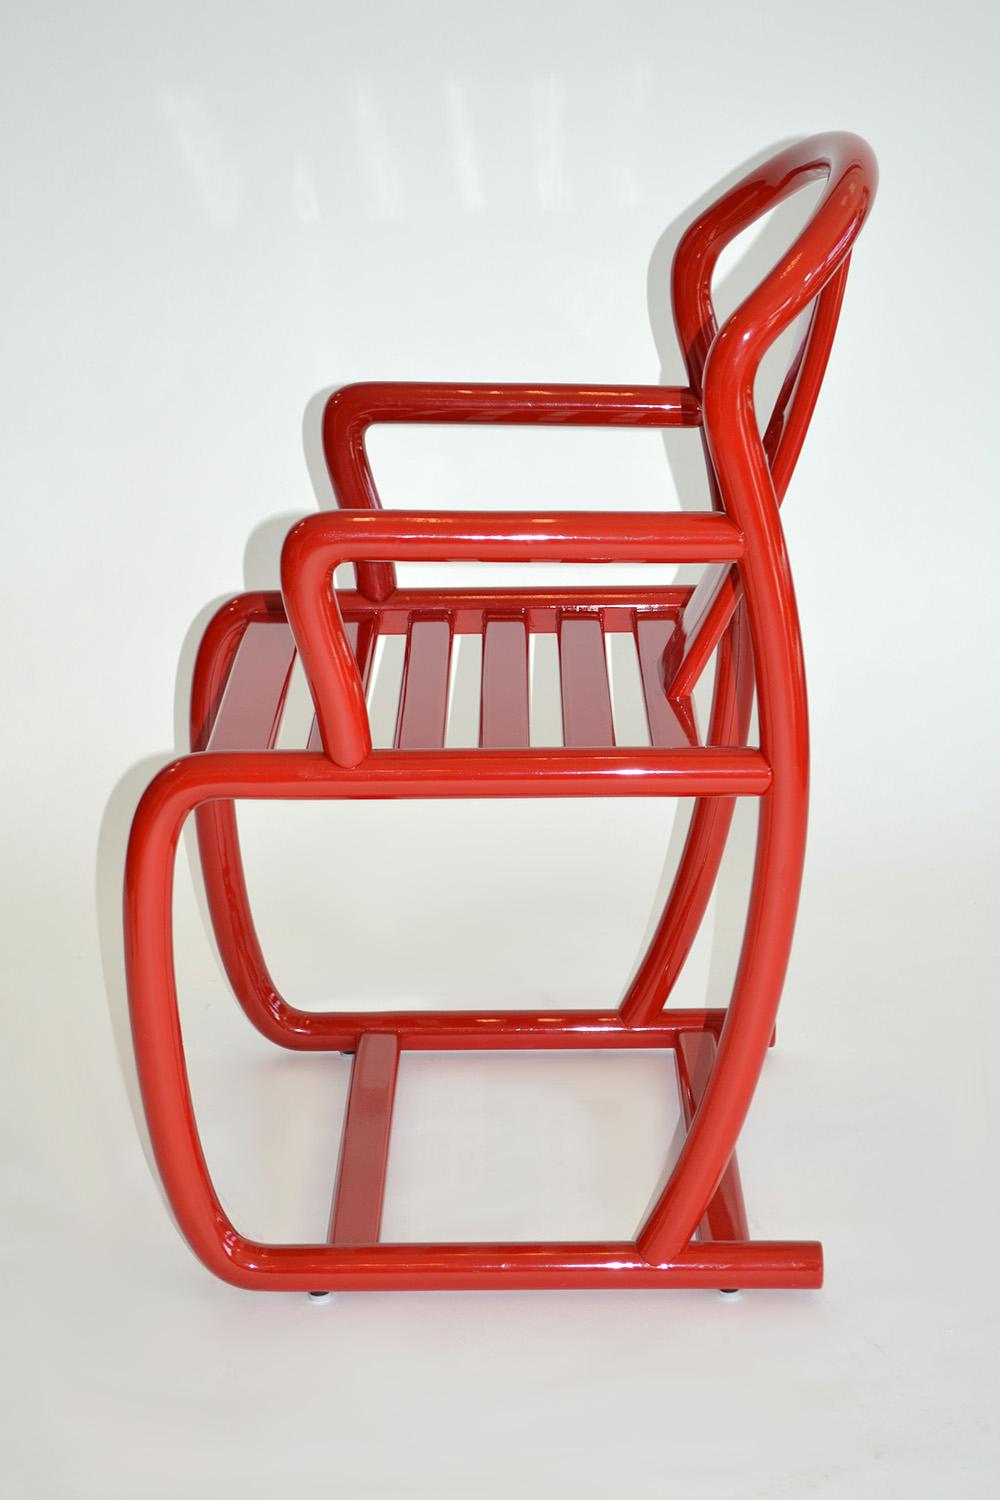 seesaw chair for adults